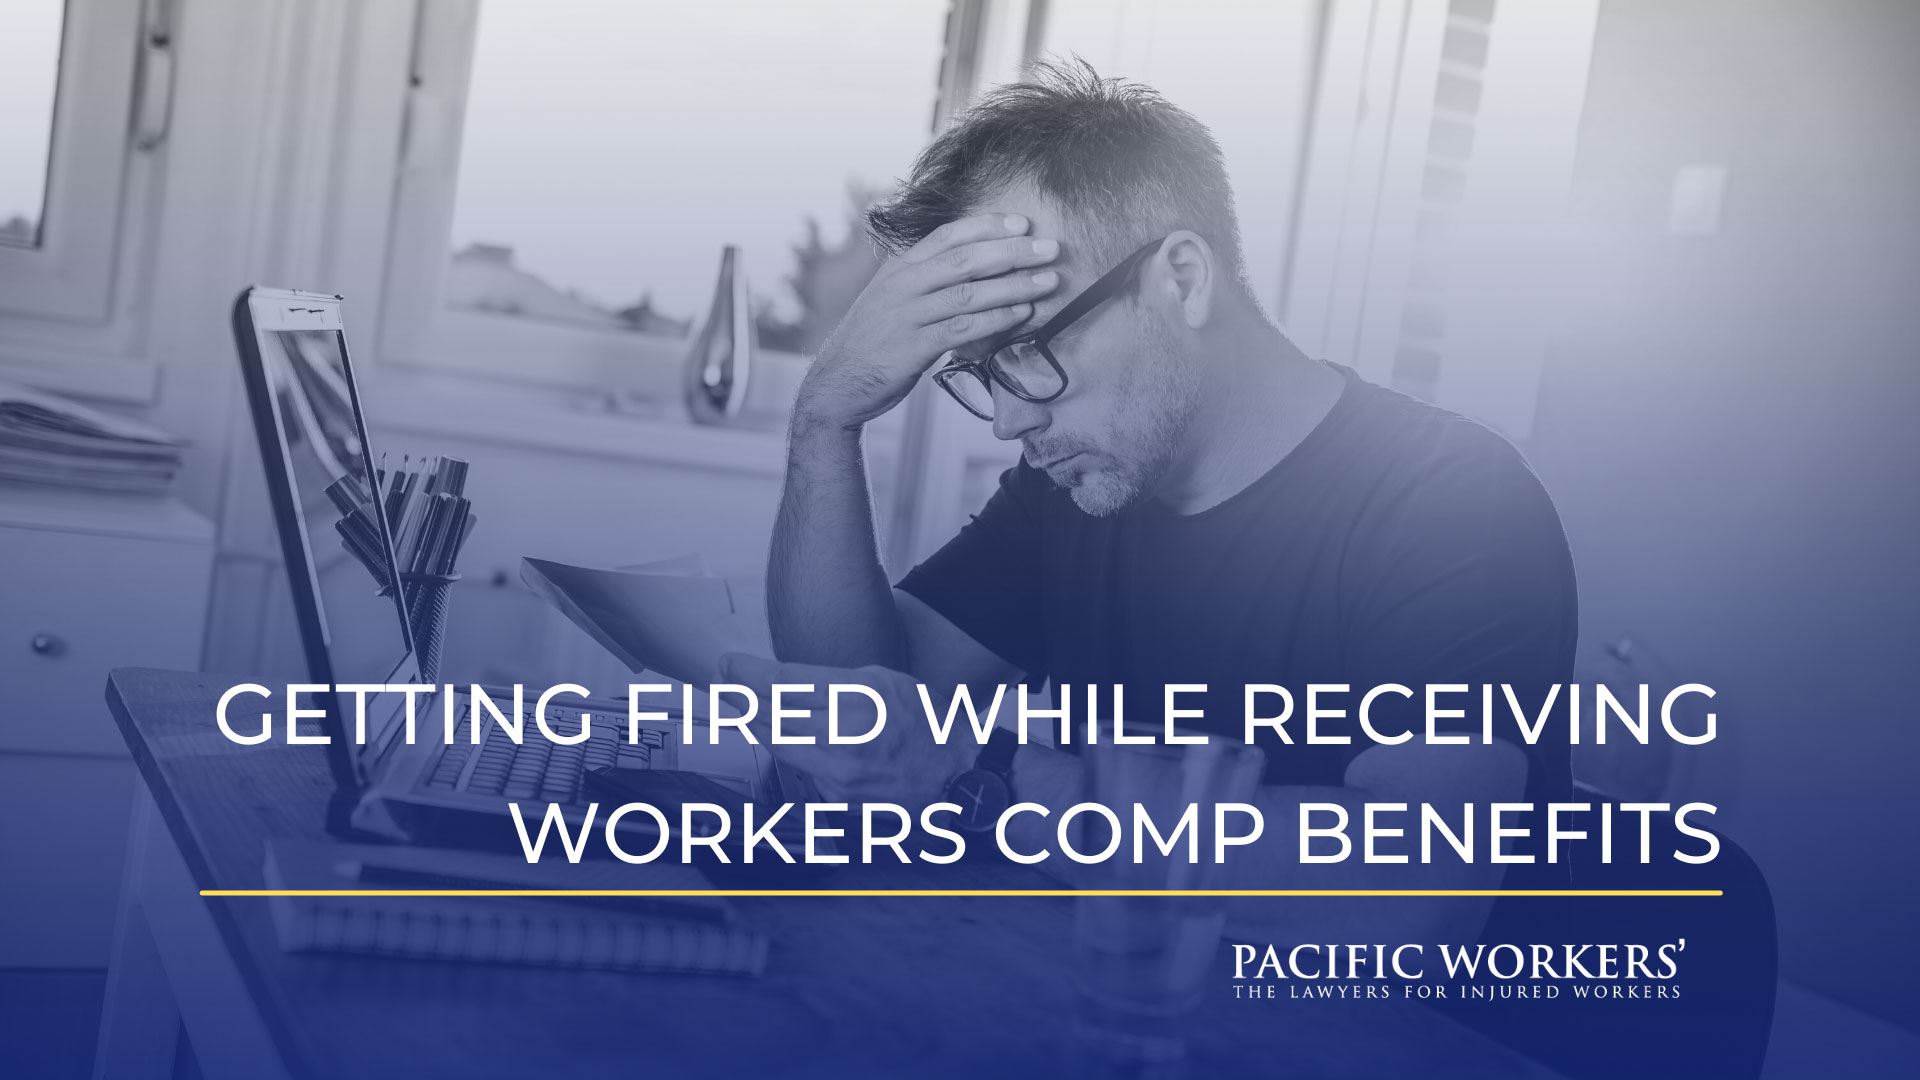 Should I Worry About Getting Fired While on Workers’ Comp